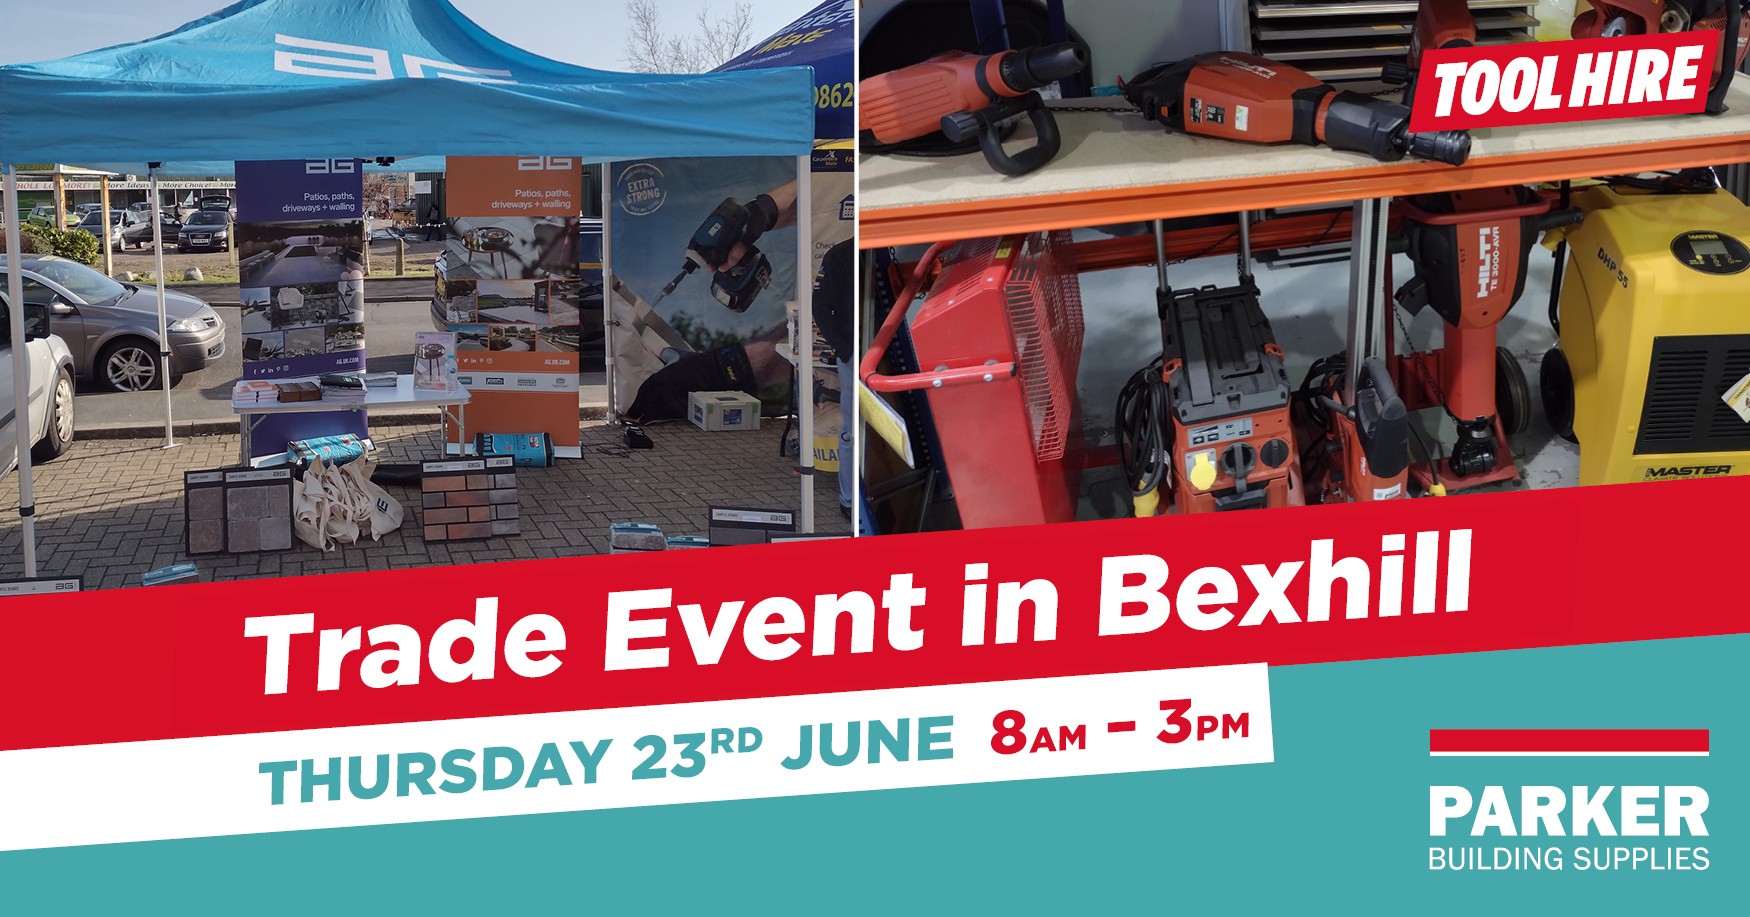 Bexhill Trade Event Announced 